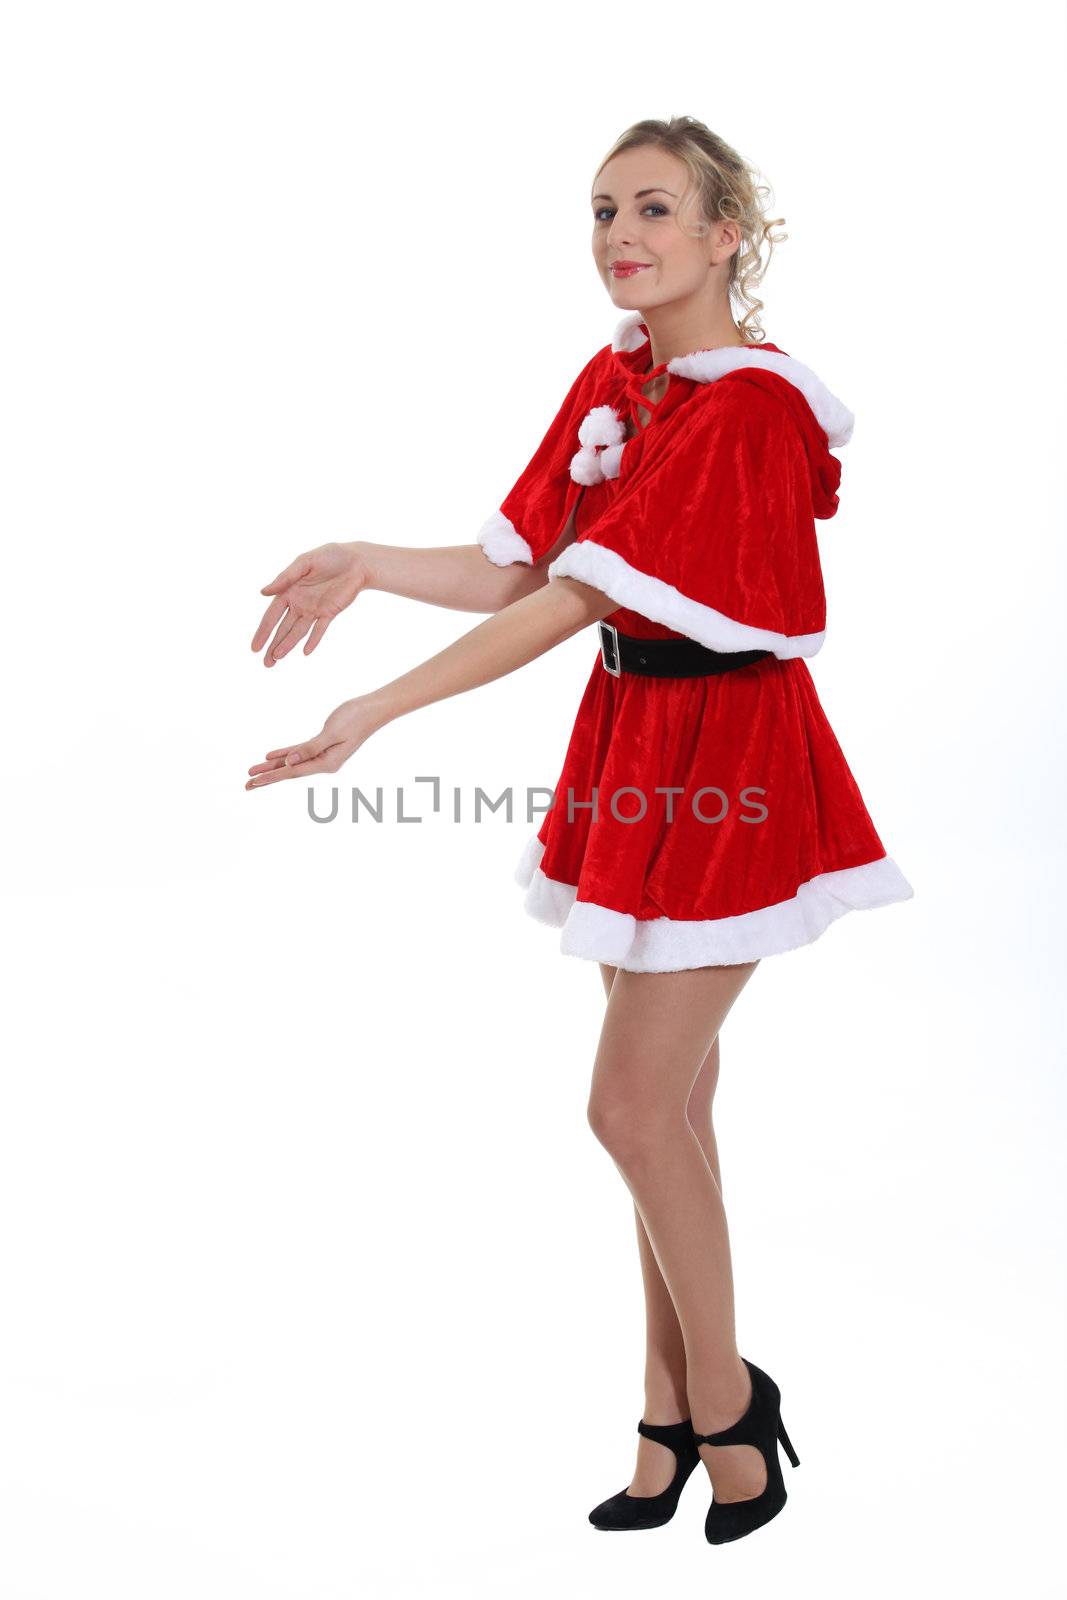 Mrs. Claus holding an invisible object